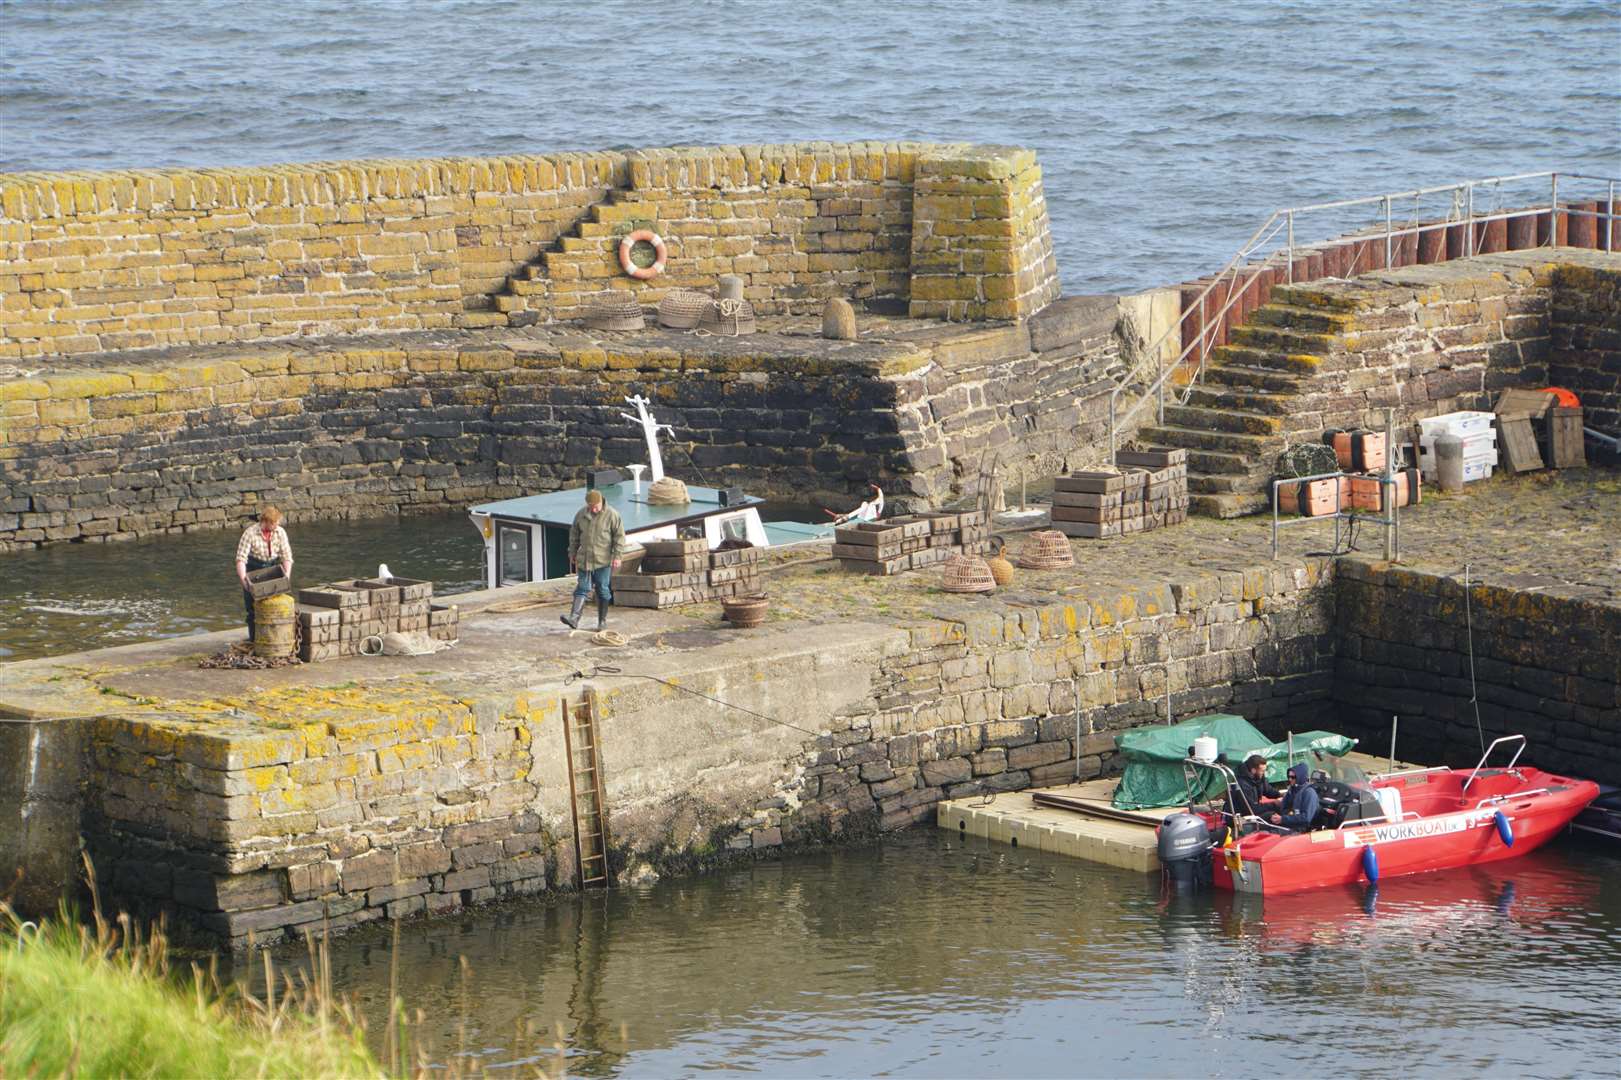 Actors at Keiss harbour for The Crown film shoot in 2019. The pontoon beside the red boat was used to stage a special effect with an explosion. Picture: DGS